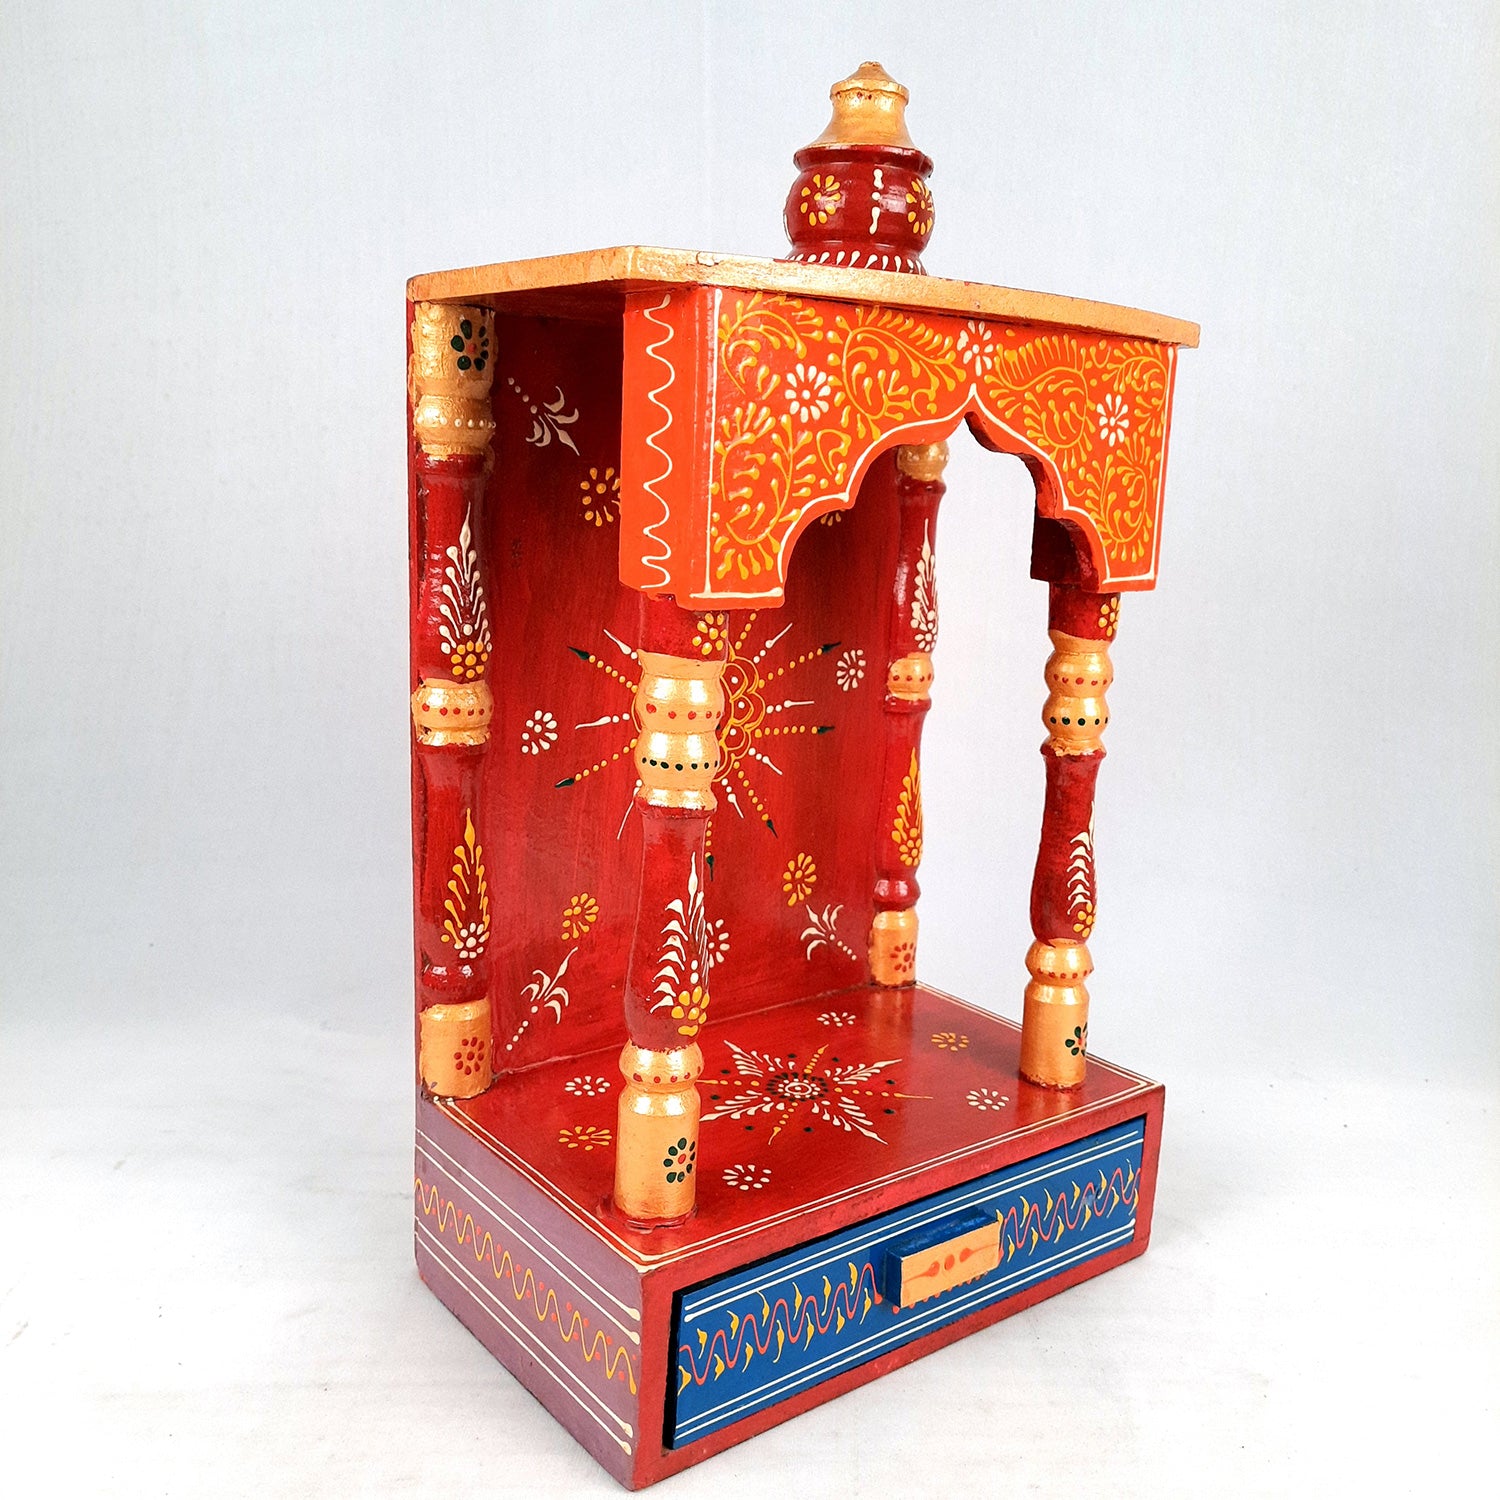 Pooja Temple with In Built Storage Drawer | Mandap For God |Puja Mandir Wall Mount - For Home , Puja Room, Office & Gifts - 15 Inch - Apkamart #Style_Style 1